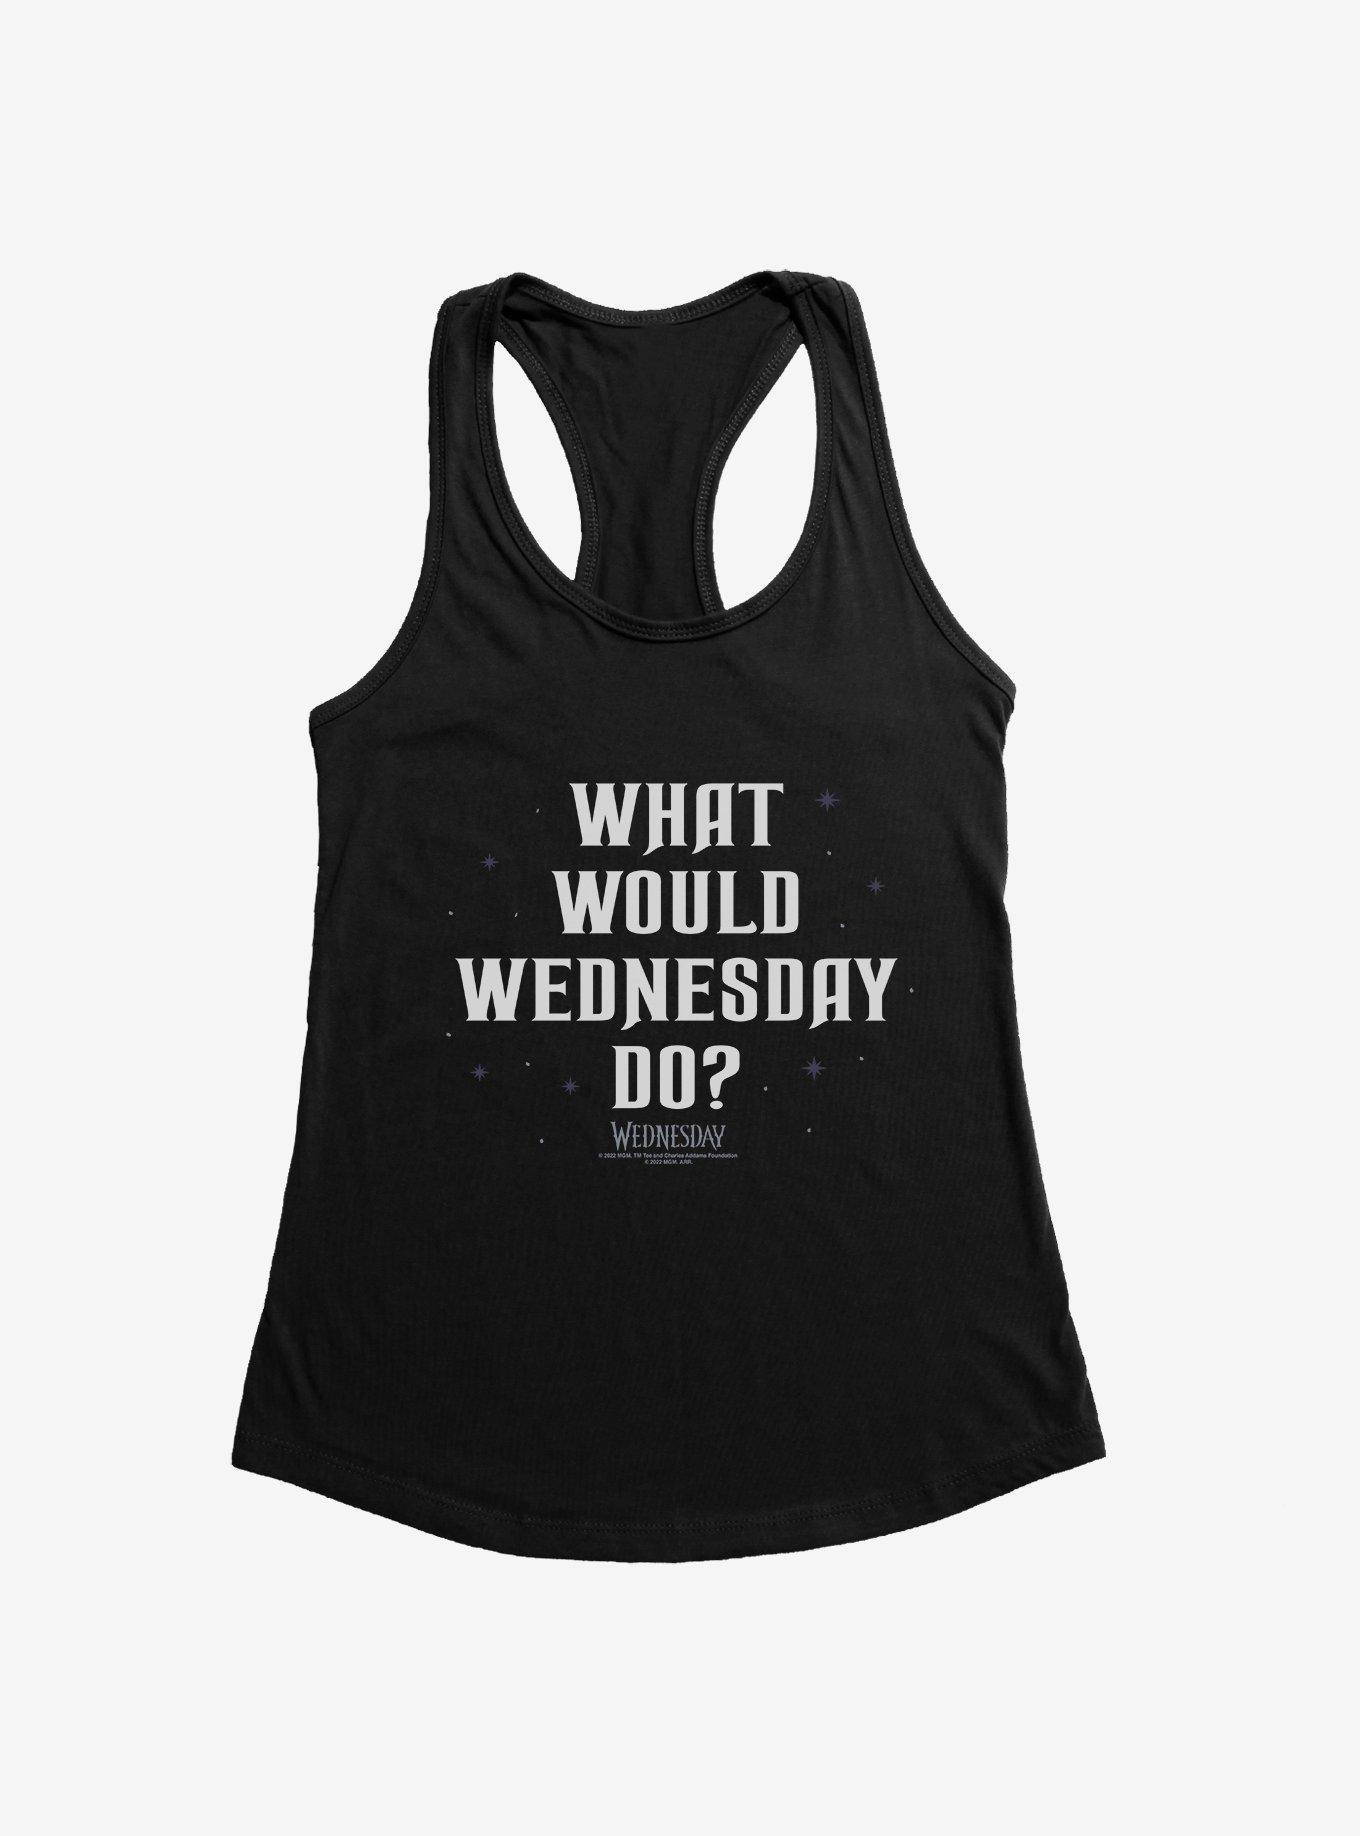 Wednesday What Would Wednesday Do? Girls Tank